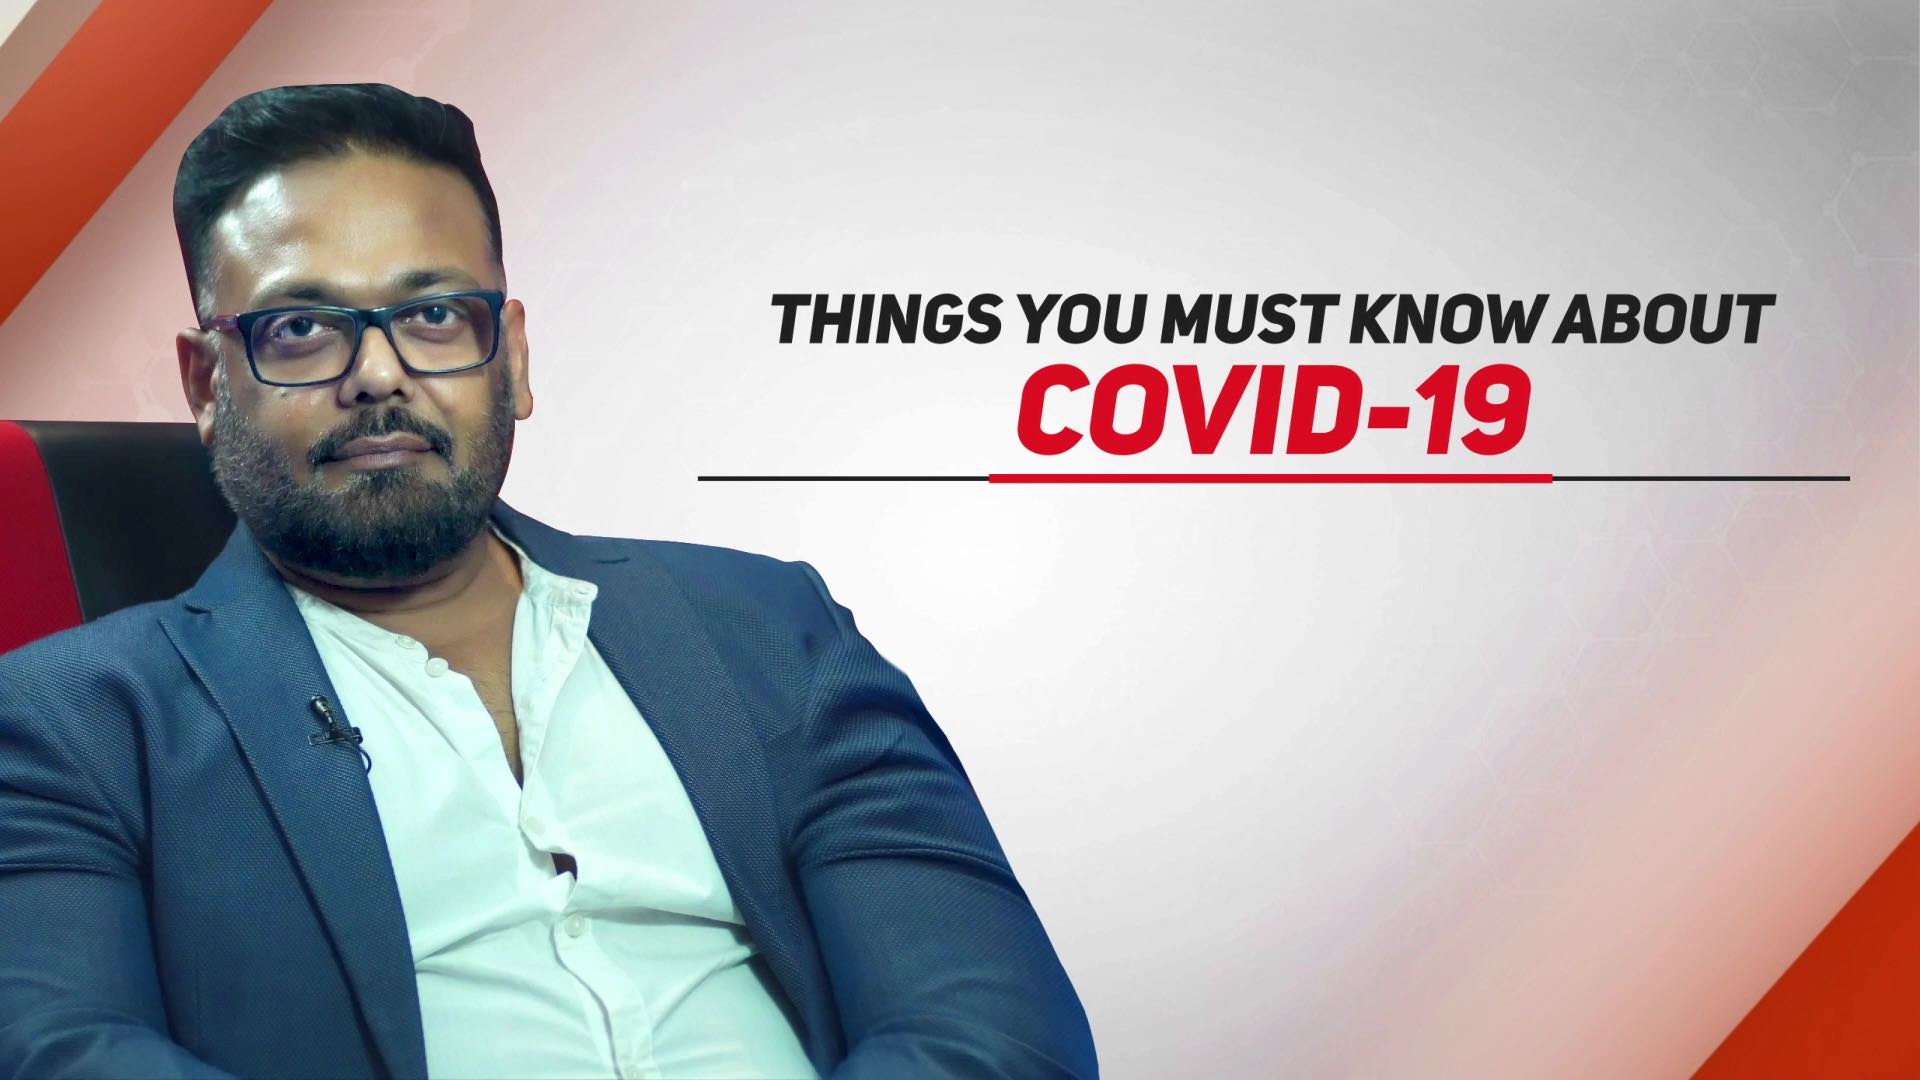 Things You Must Know About COVID-19